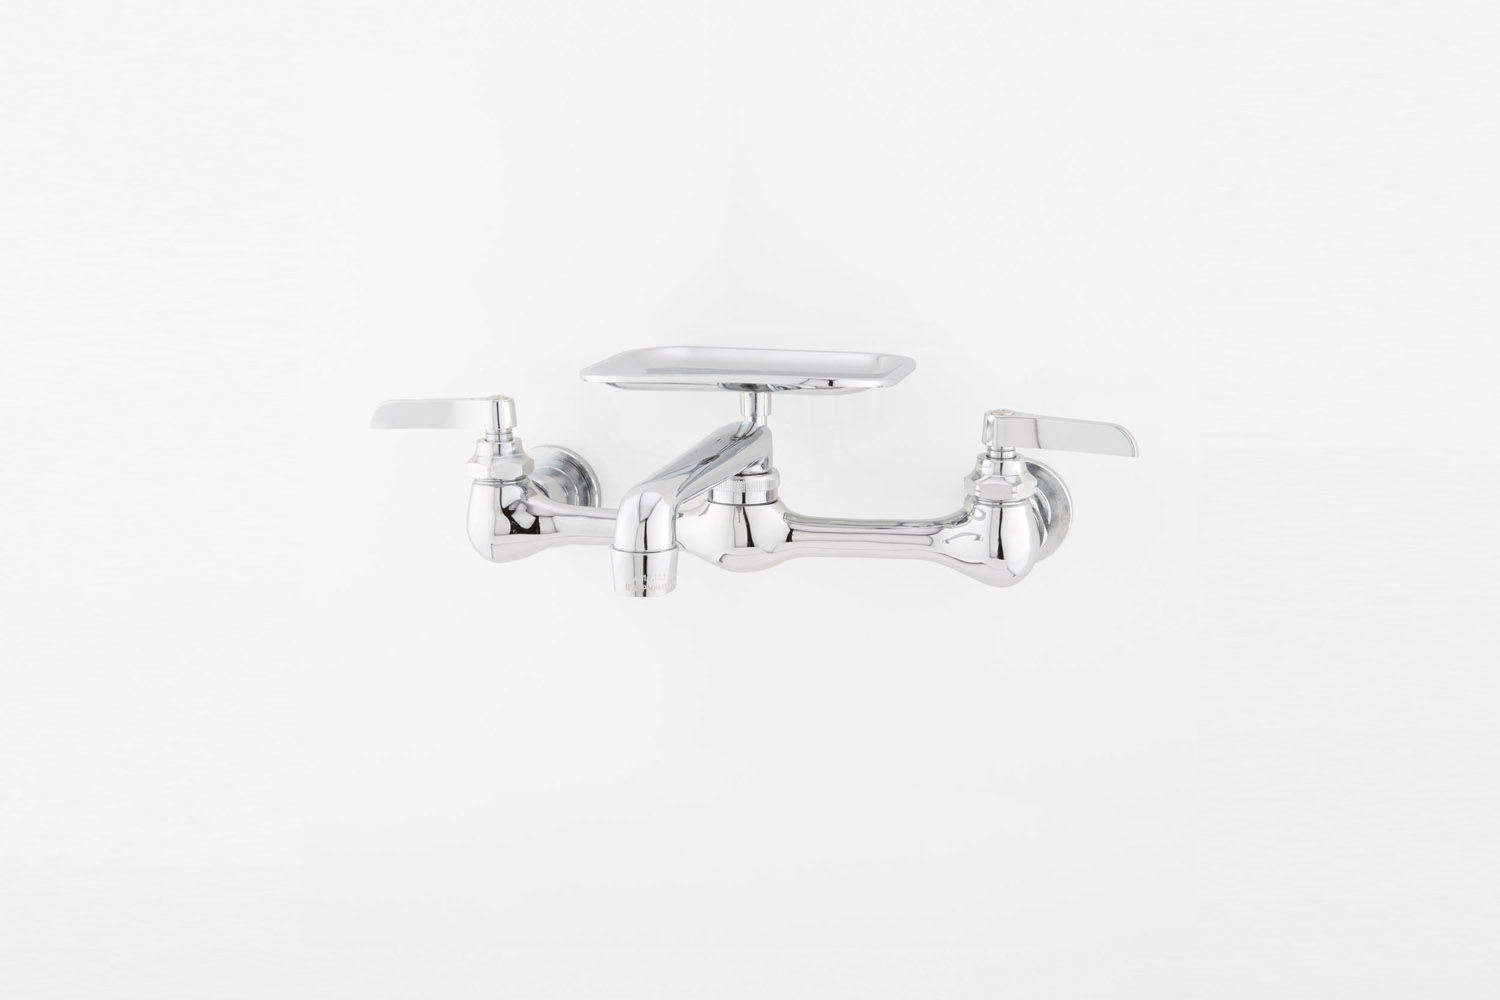 6 Spout Wall Mount Utility Faucet - with Soap Dish 9714881